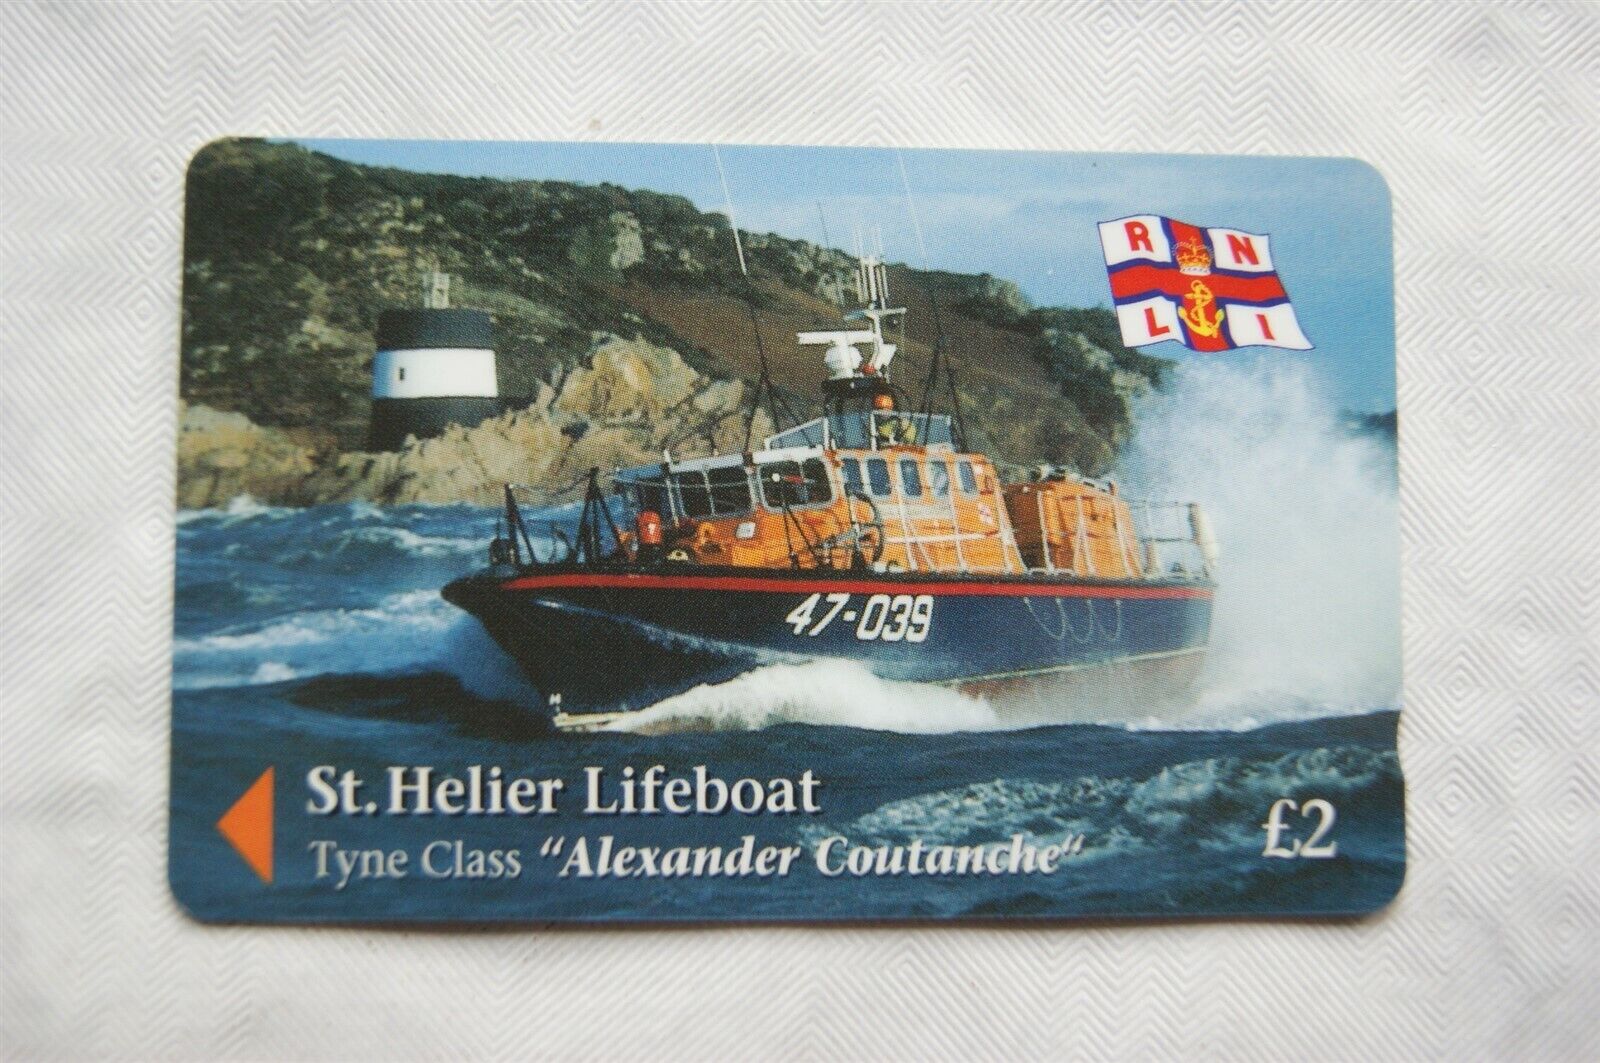 Jersey Phone Card - St Helier Lifeboat, Tyne Class, Alexander Coutanche ref.1